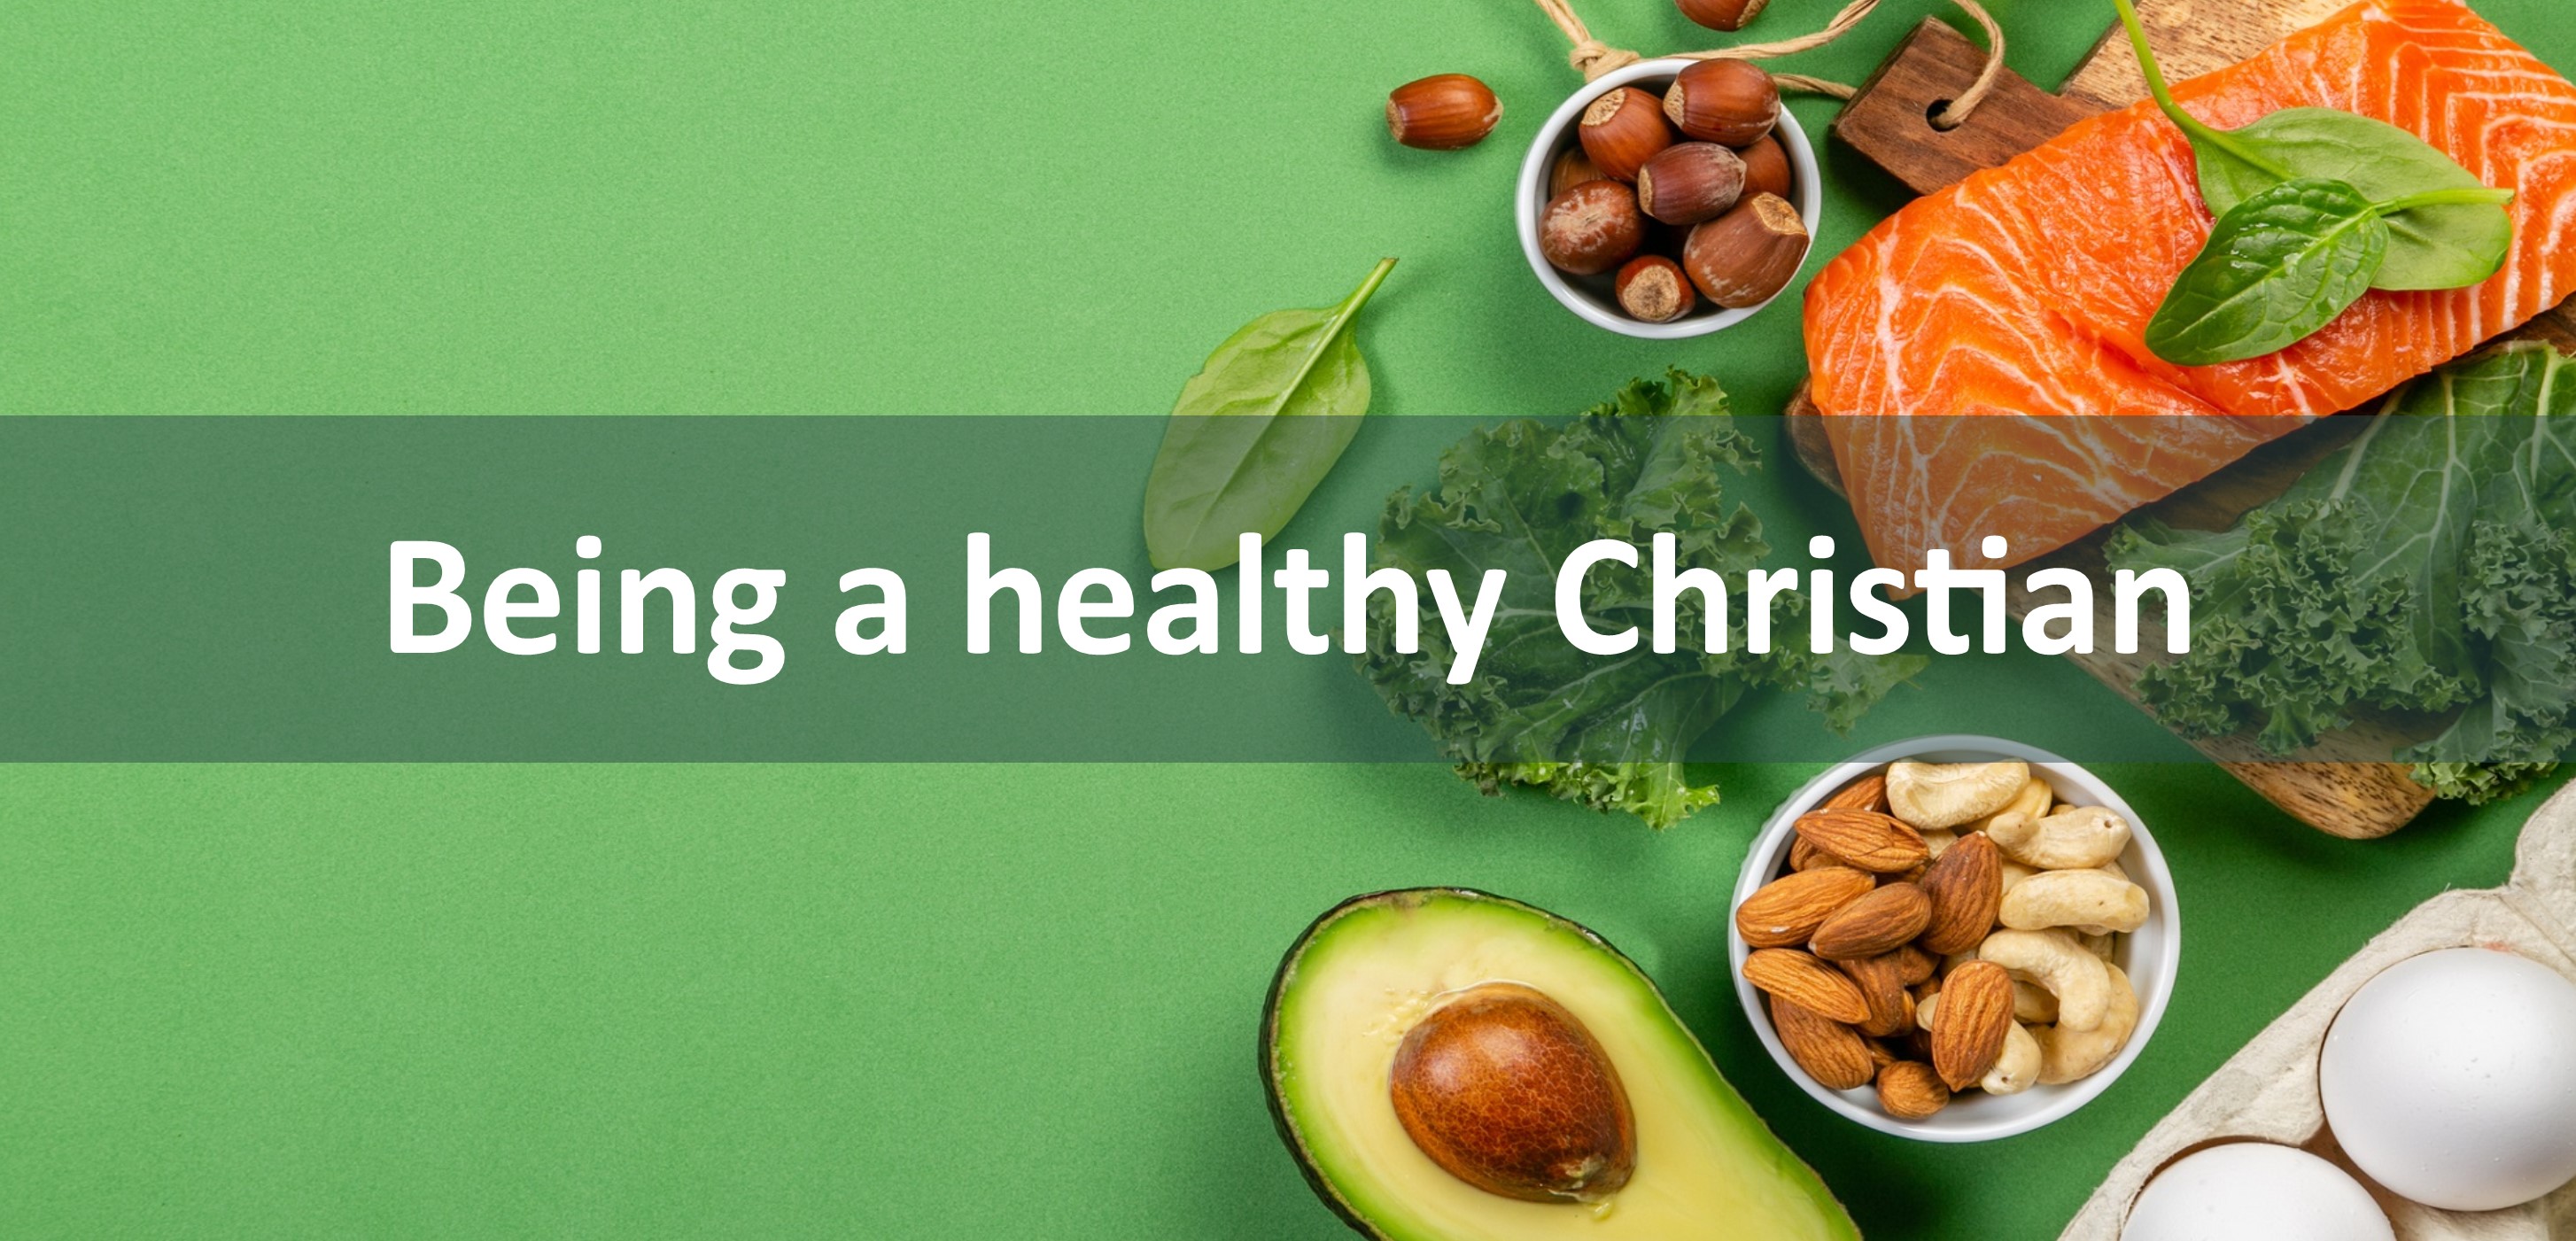 Being a healthy Christian